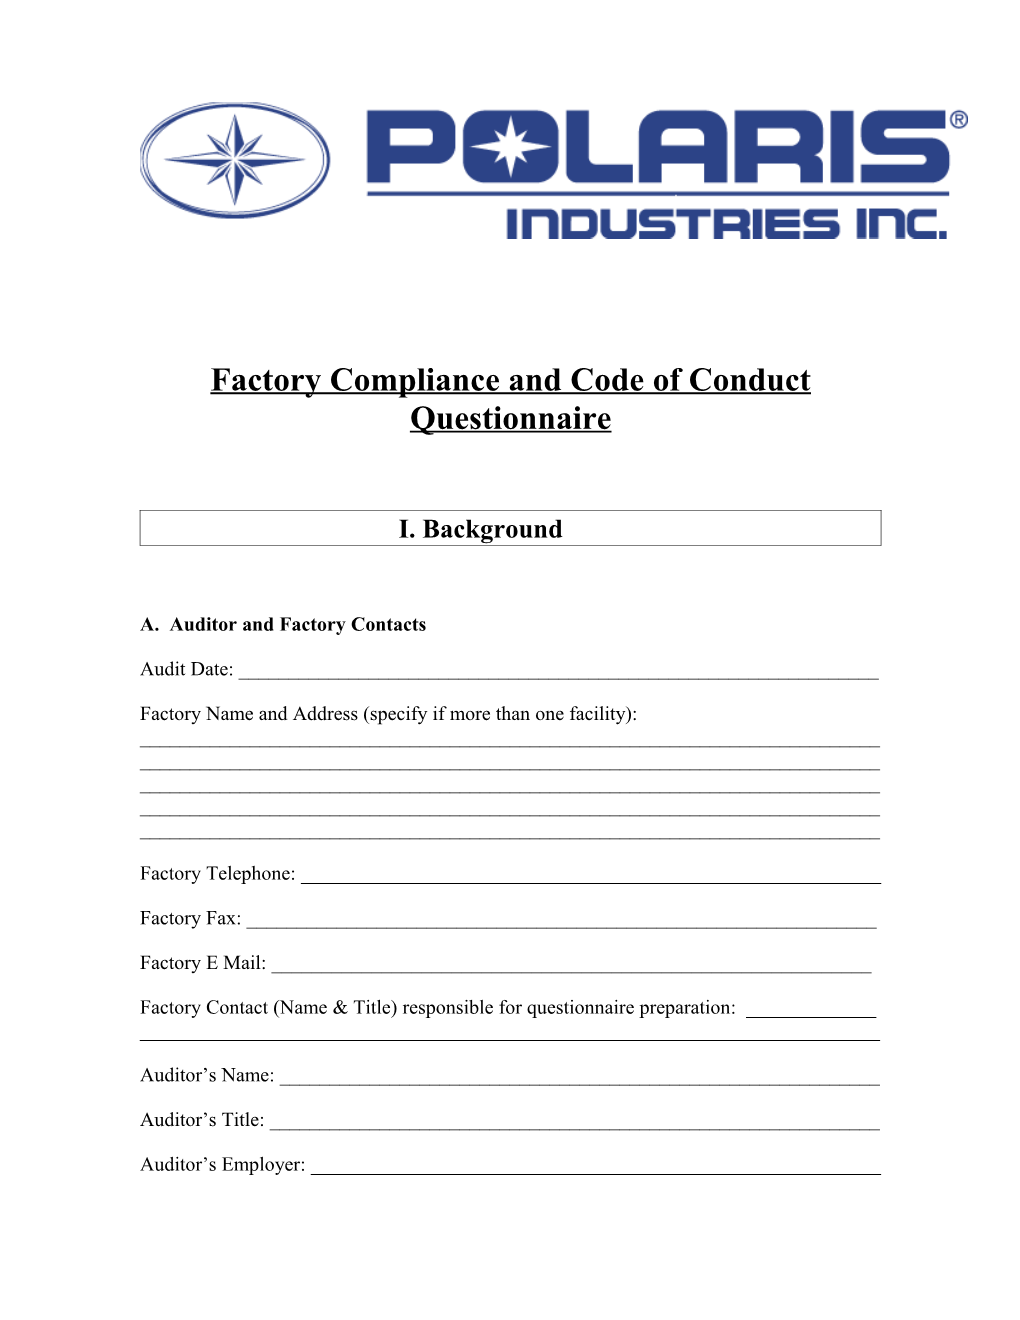 Factory Compliance and Code of Conduct Questionnaire